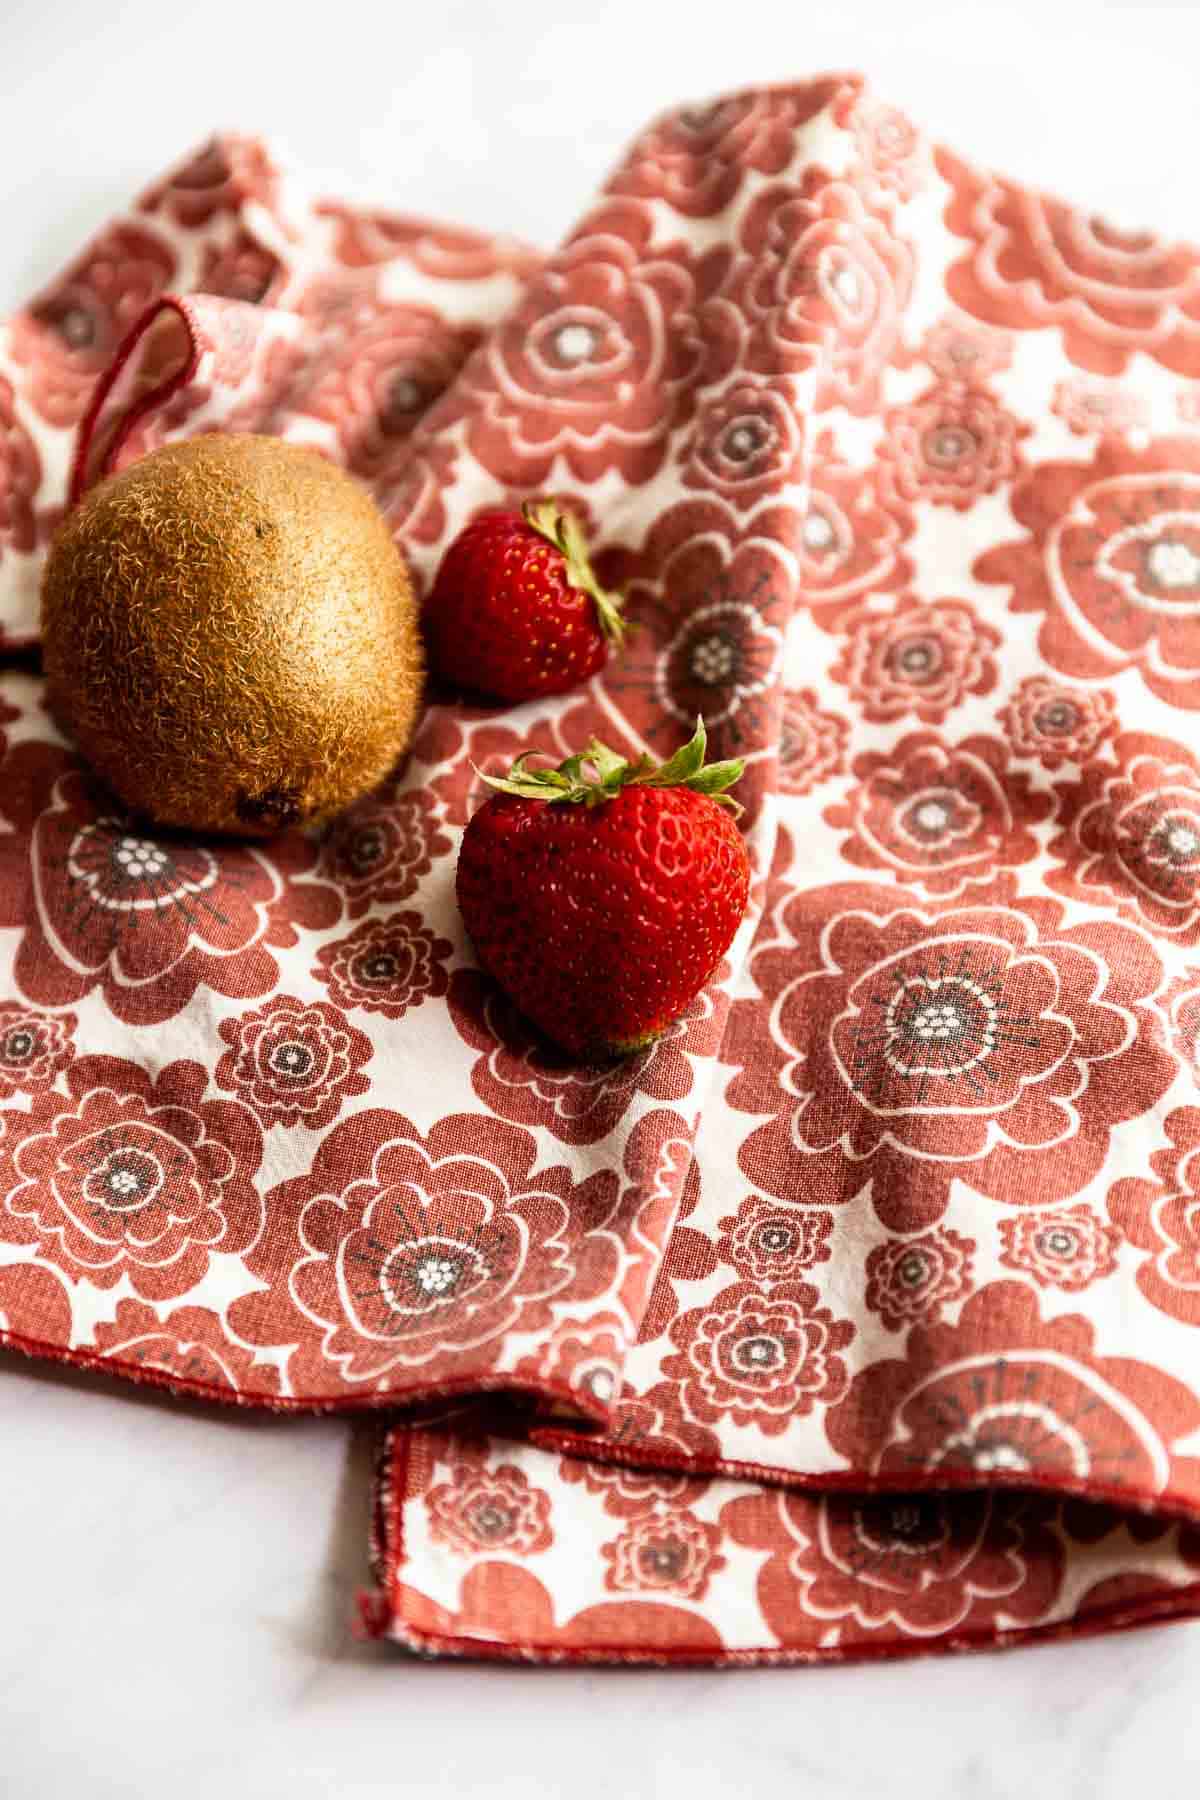 A couple strawberries and a kiwi laying on a red floral napkin.